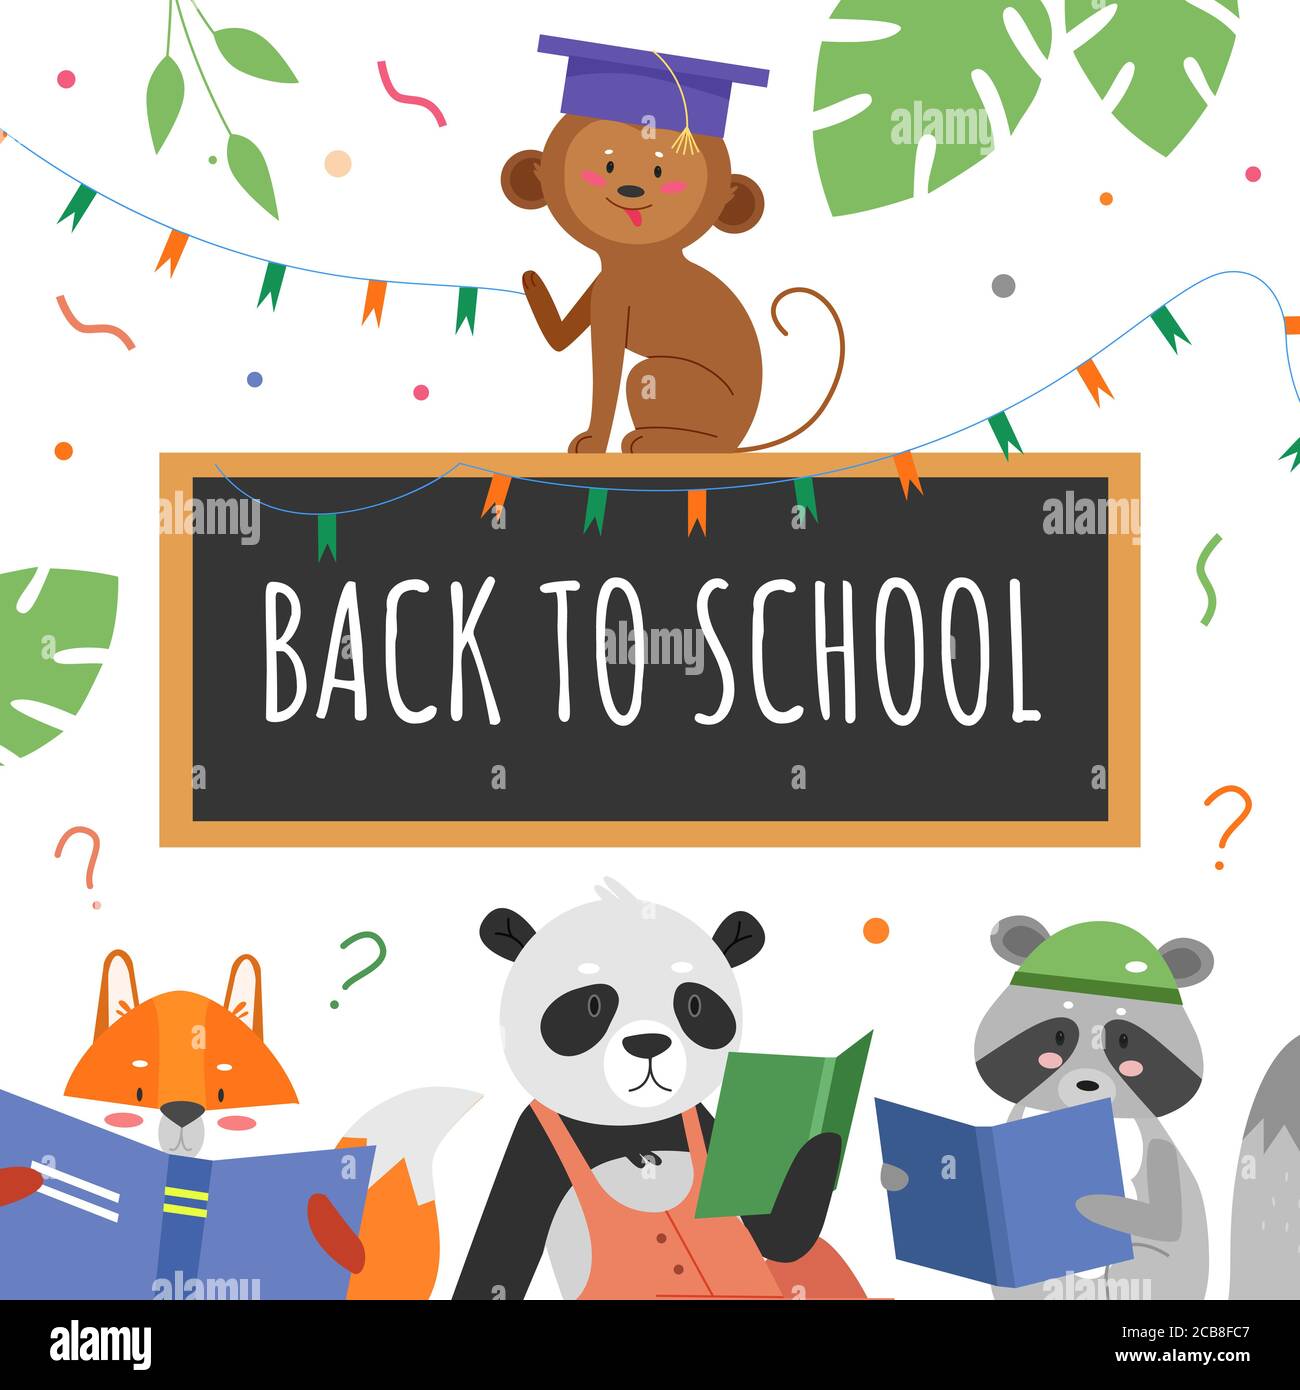 Animal education concept vector illustration. Cartoon flat animalistic student characters study and read books, back to school text written in chalk on classroom blackboard, educational background Stock Vector